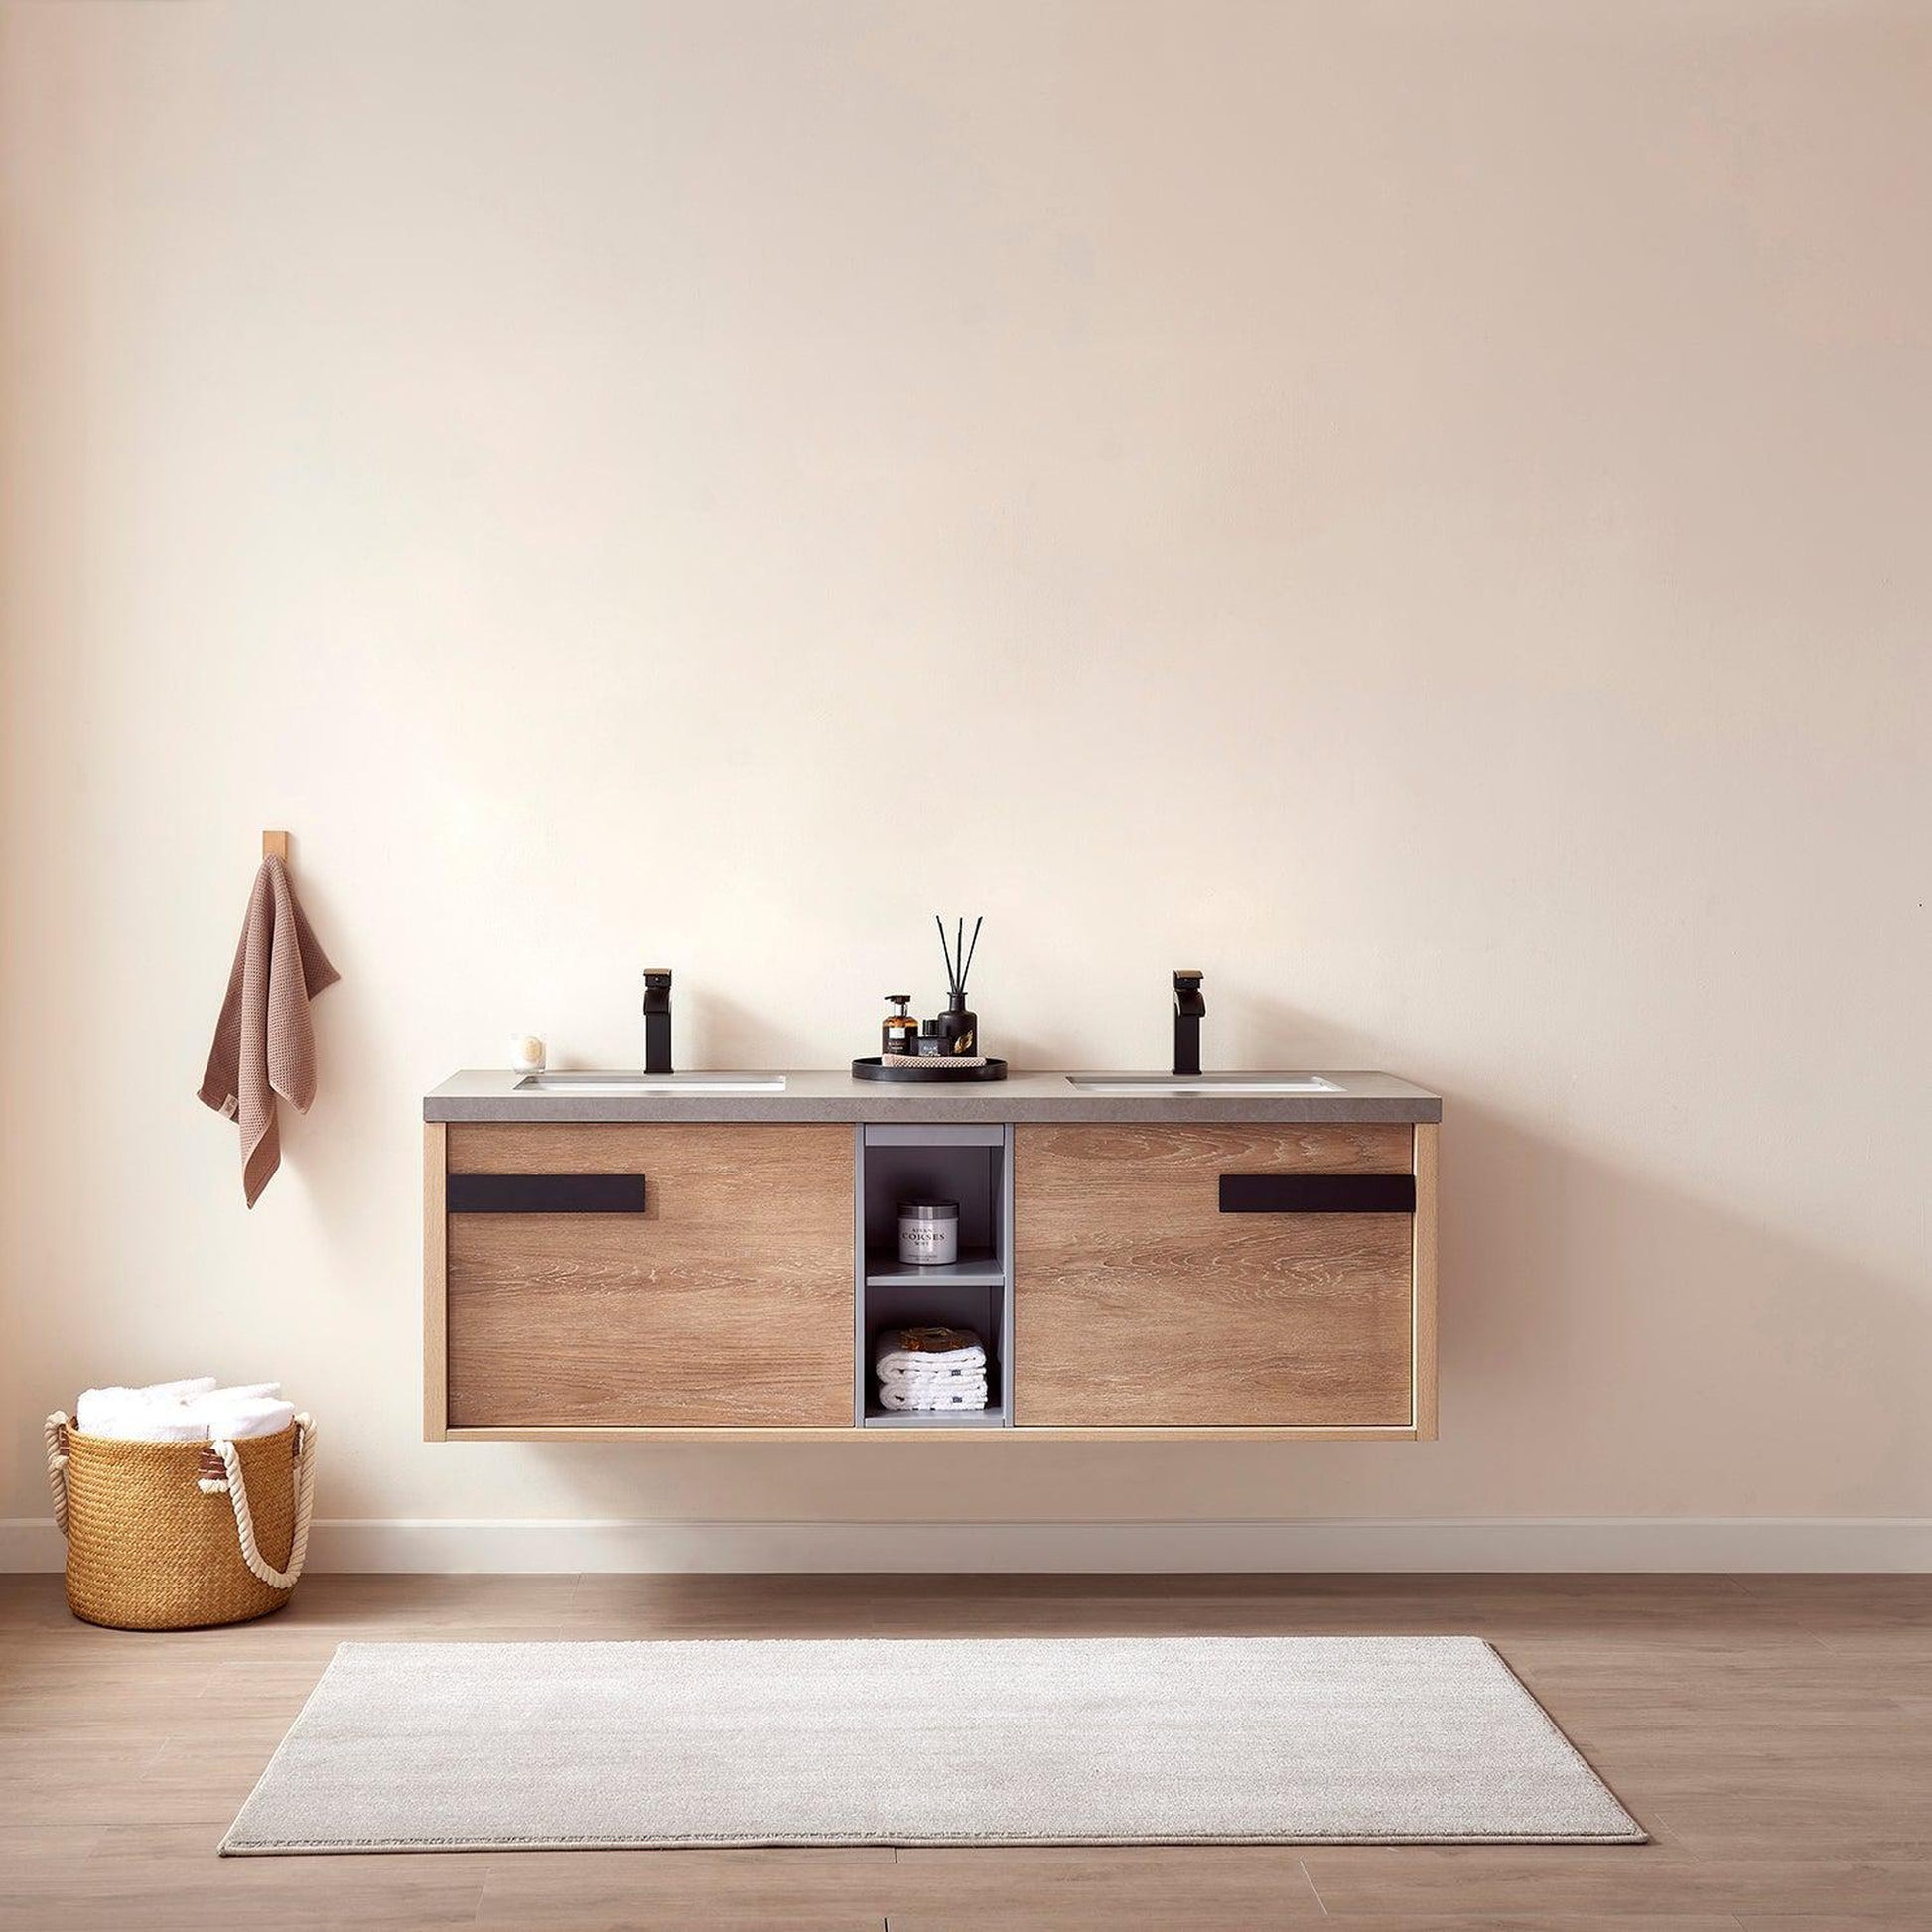 Vinnova Carcastillo 63" Double Sink Bath Vanity In North American Oak And Matte Black Hardware Finish With Grey Sintered Stone Top